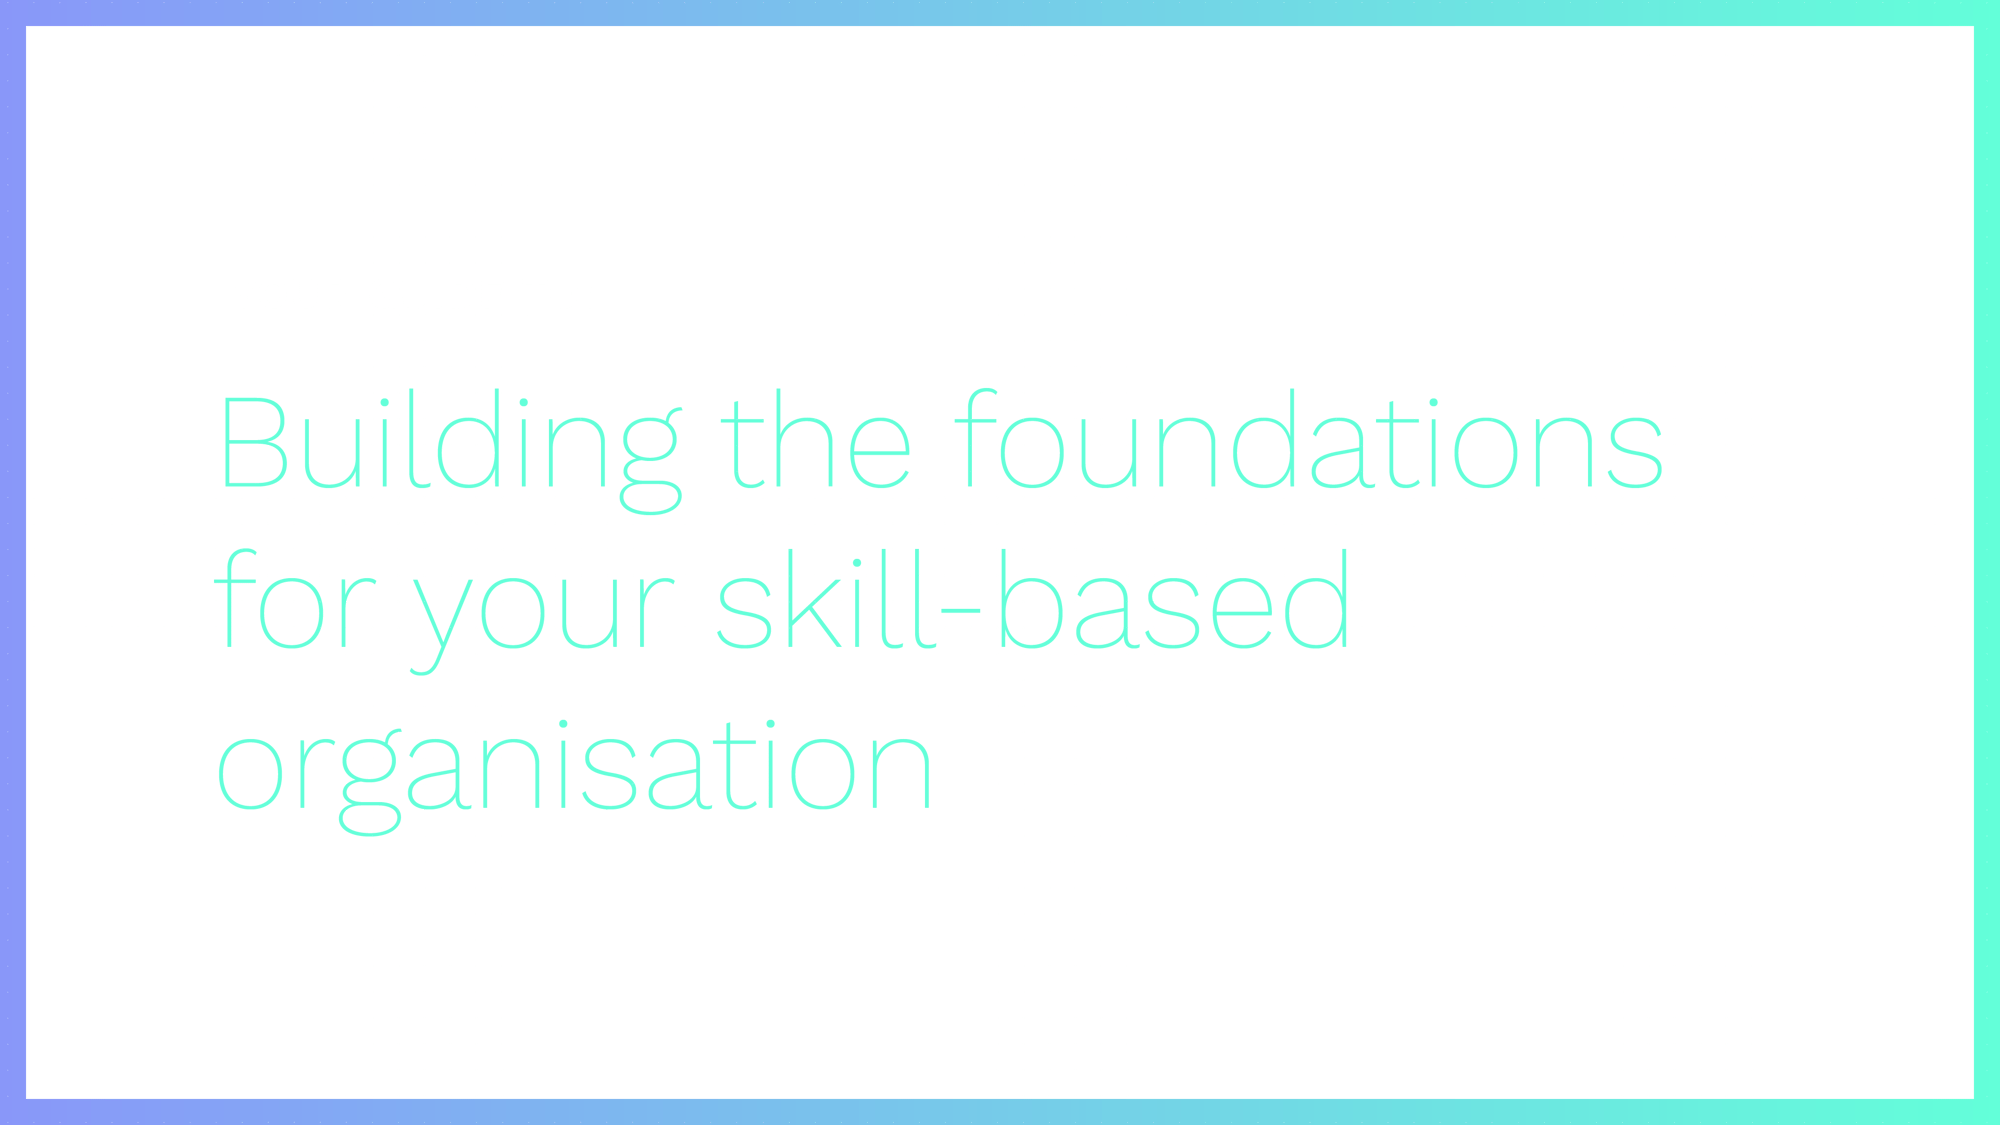 Guide: Building the foundations for your skill-based organisation